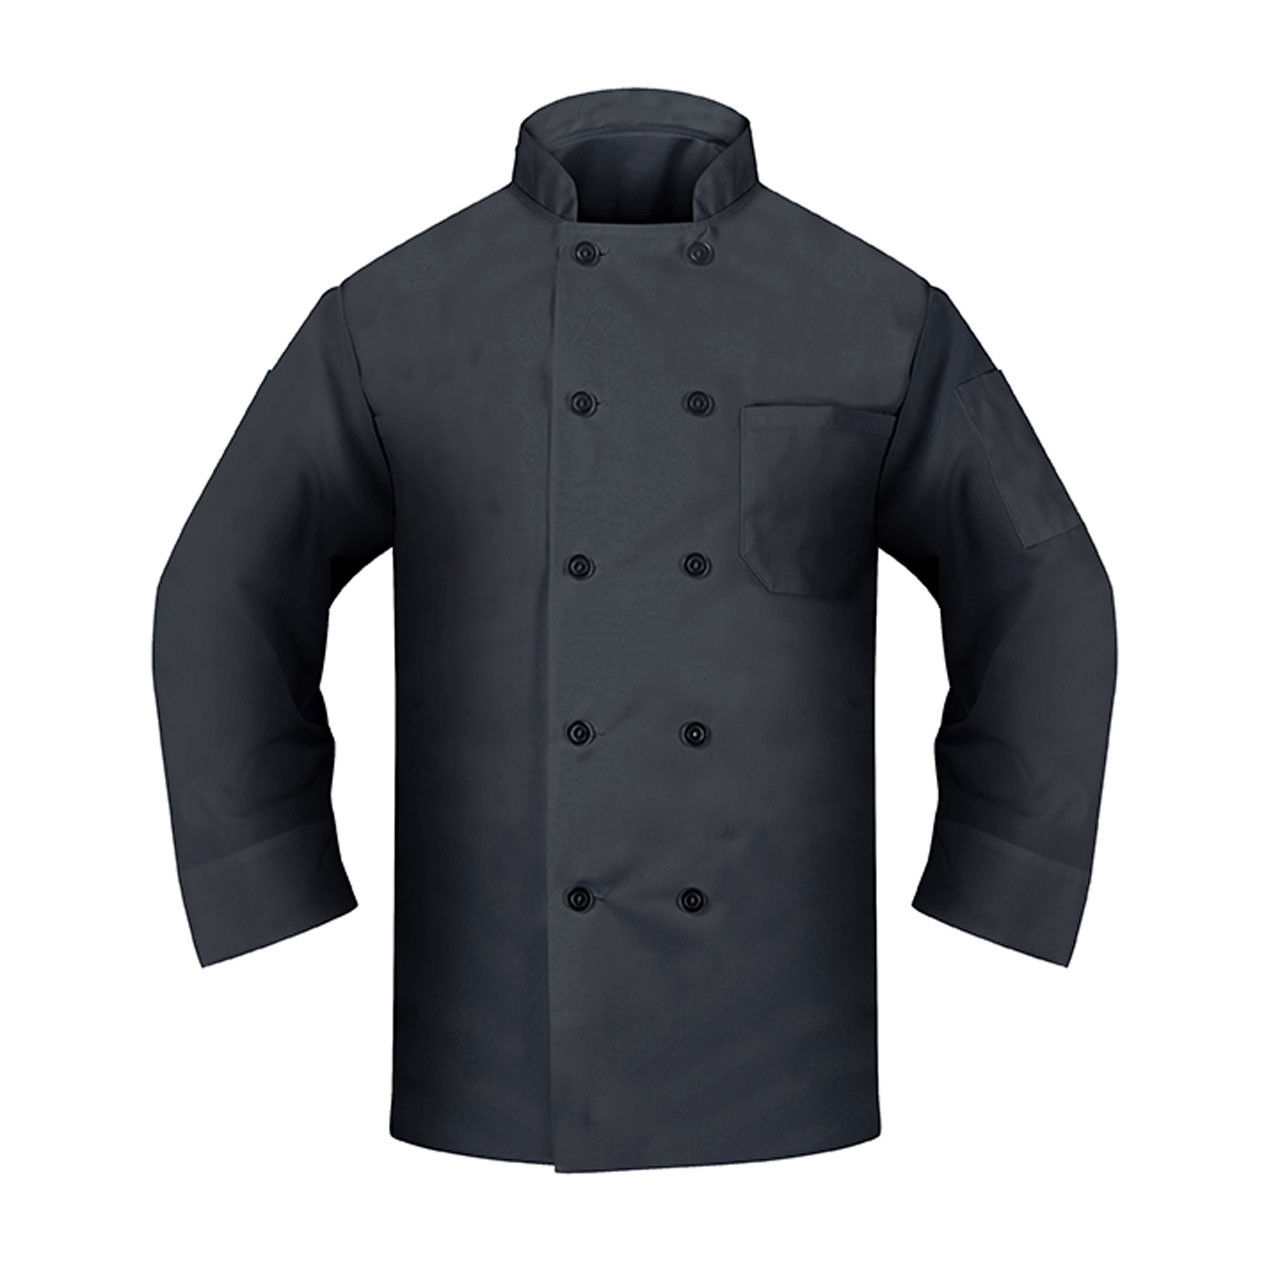 Does the black chef coat have buttons or a zipper closure?